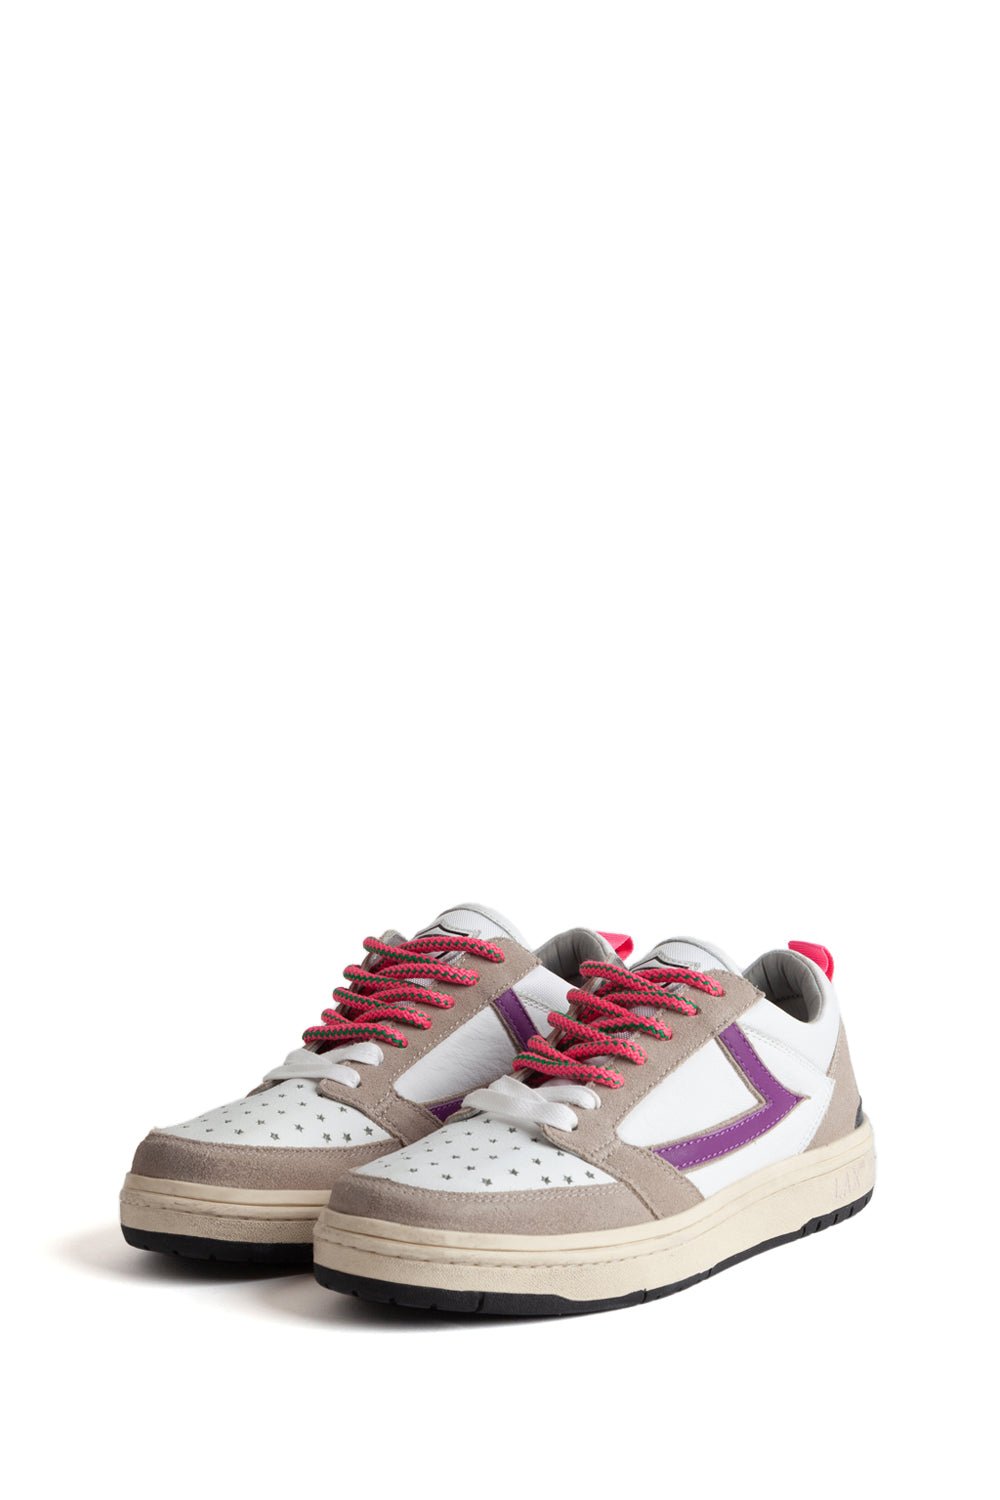 STARLIGHT LOW WOMAN Starlight Low Woman Sneakers, back pull loop with logo detail, rubber sole, perforated toe and front lace-up closure, 100% leather HTC LOS ANGELES